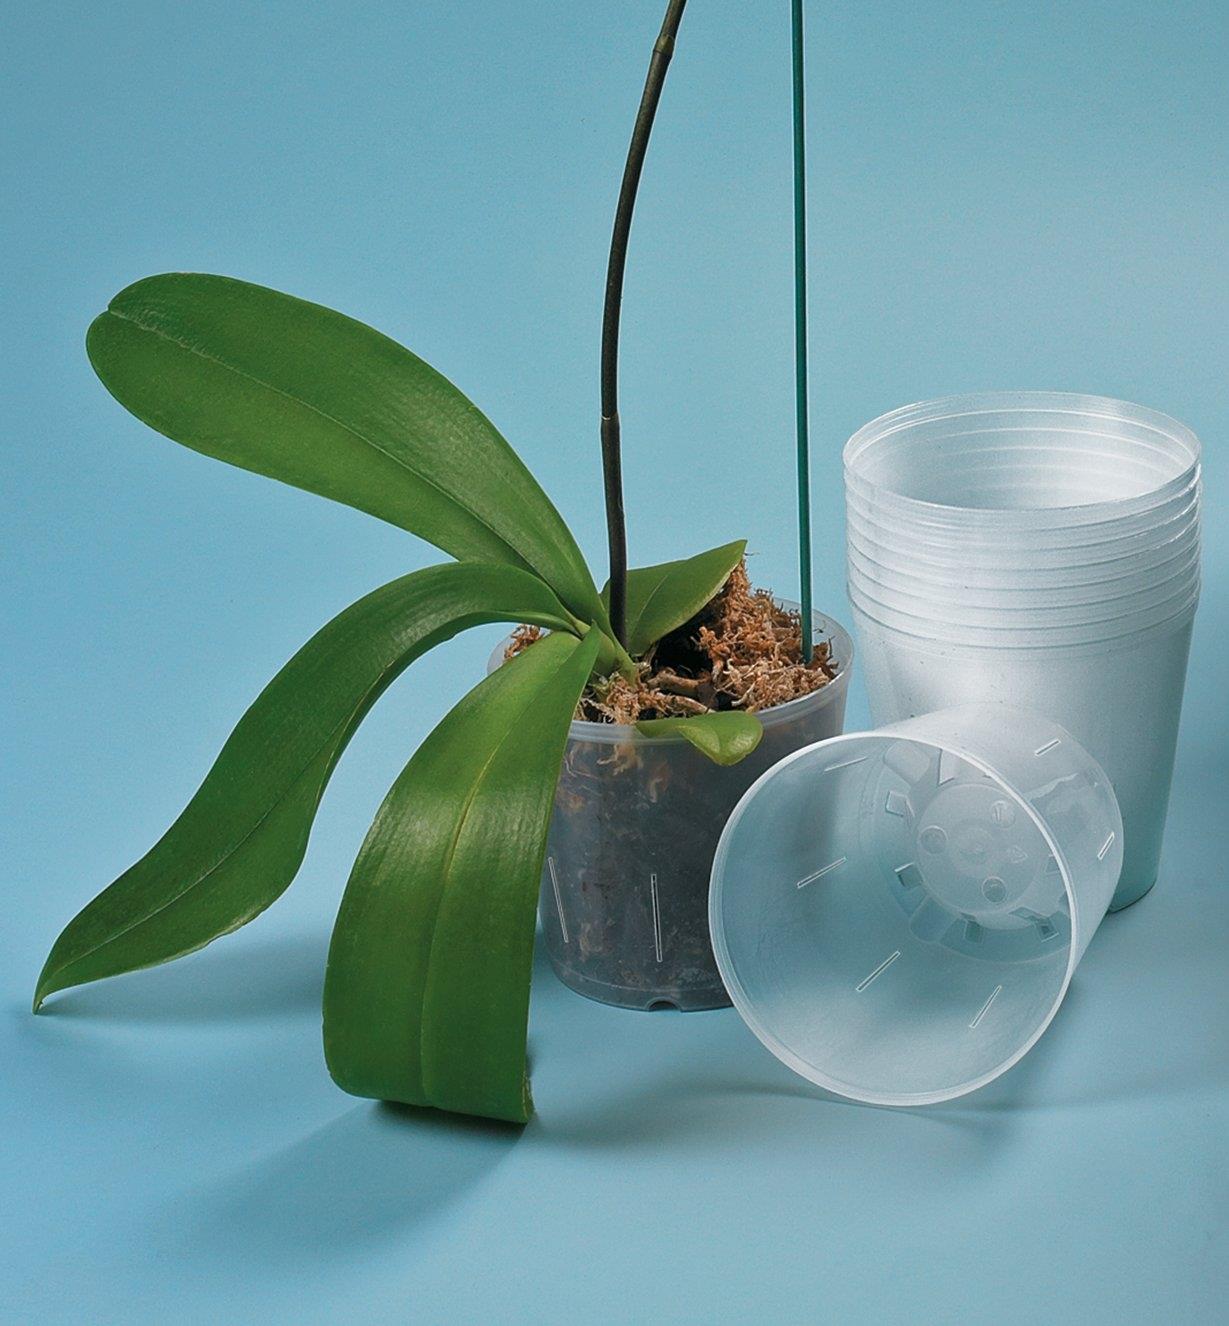 A stack of Clear Orchid Pots next to one with an orchid planted in it